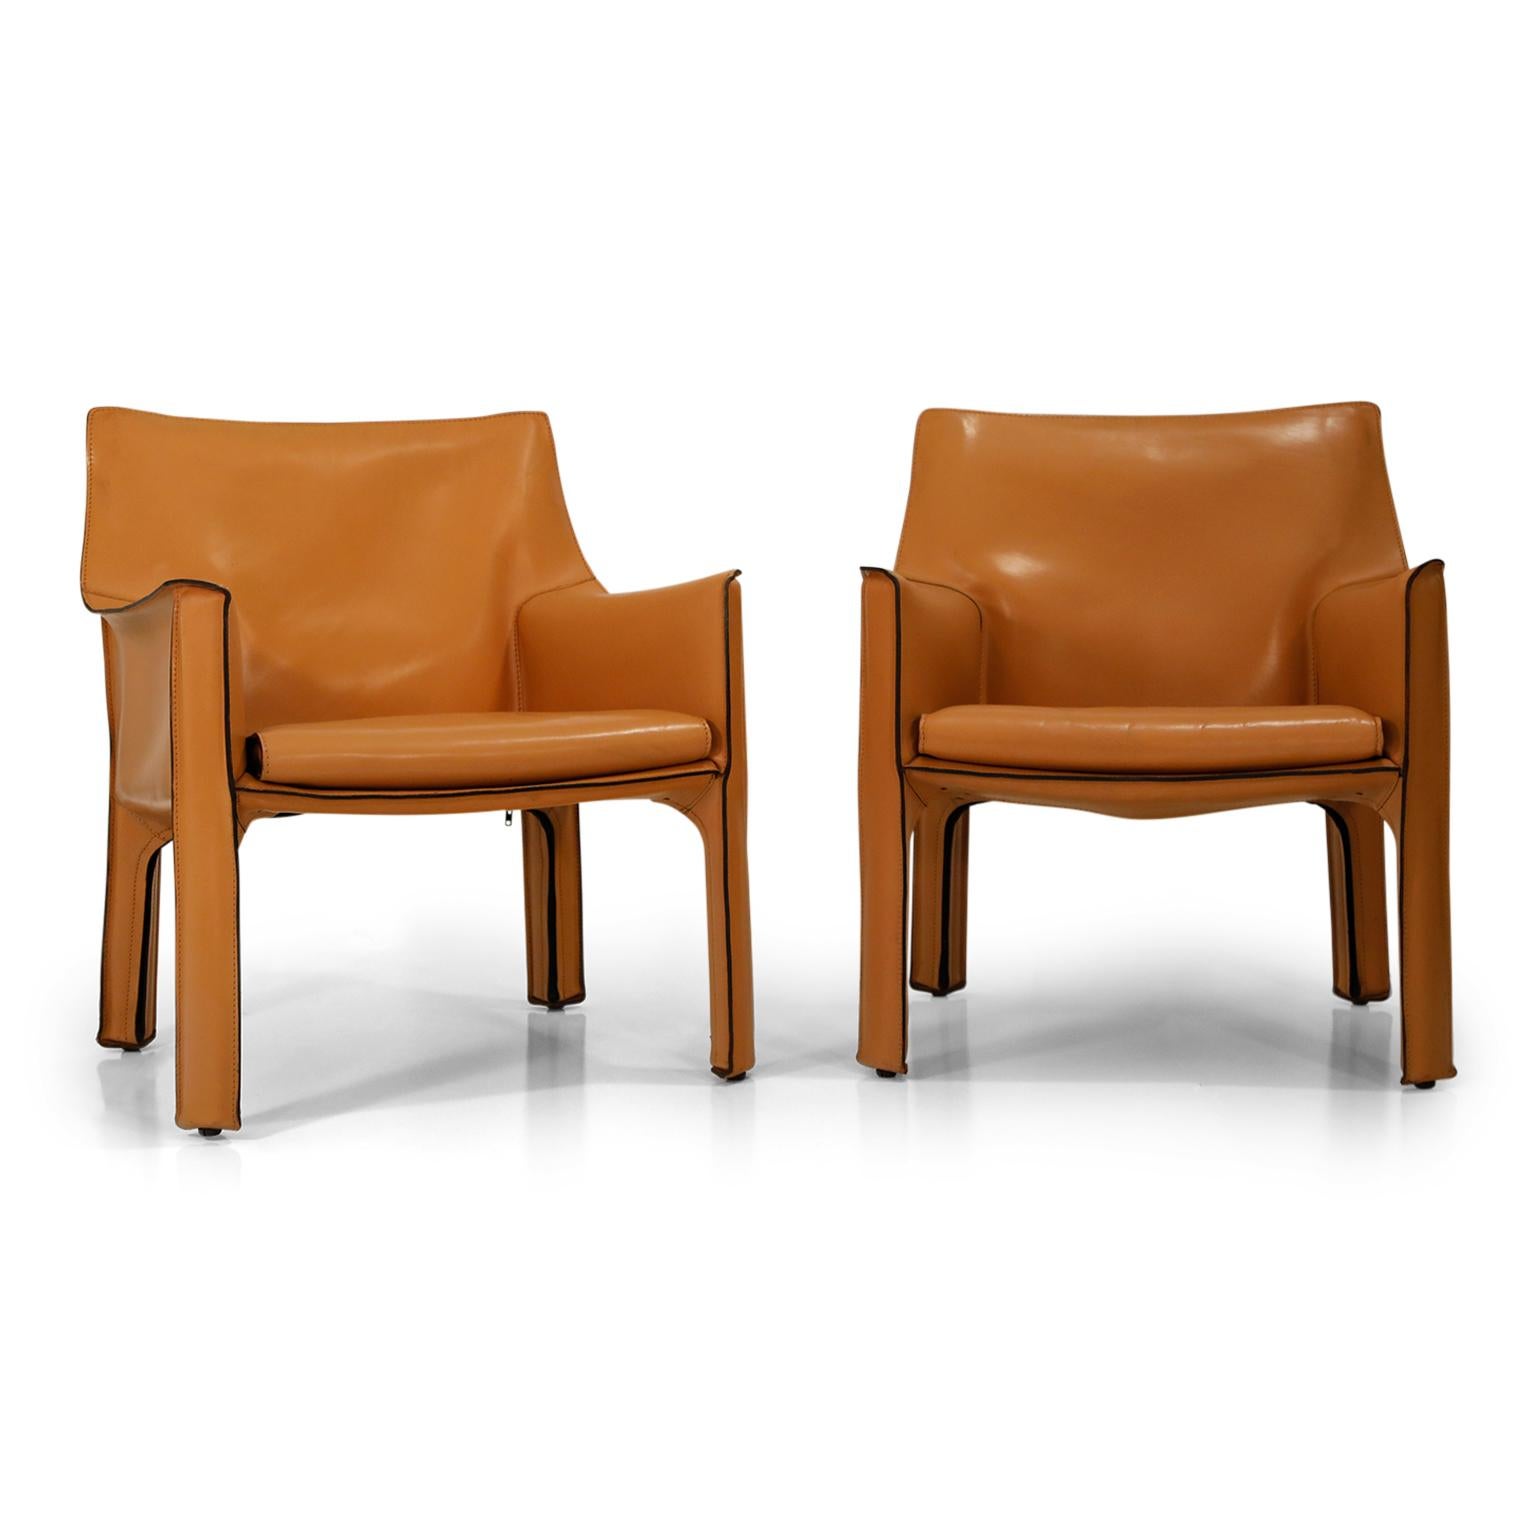 A beautiful pair of Mario Bellini Cab lounge chairs in exemplary condition, signed Cassina, designed and produced in the 1970s and priced for the pair of two (2) chairs. The lounge armchairs are similar to the Classic dining armchair counterpart but